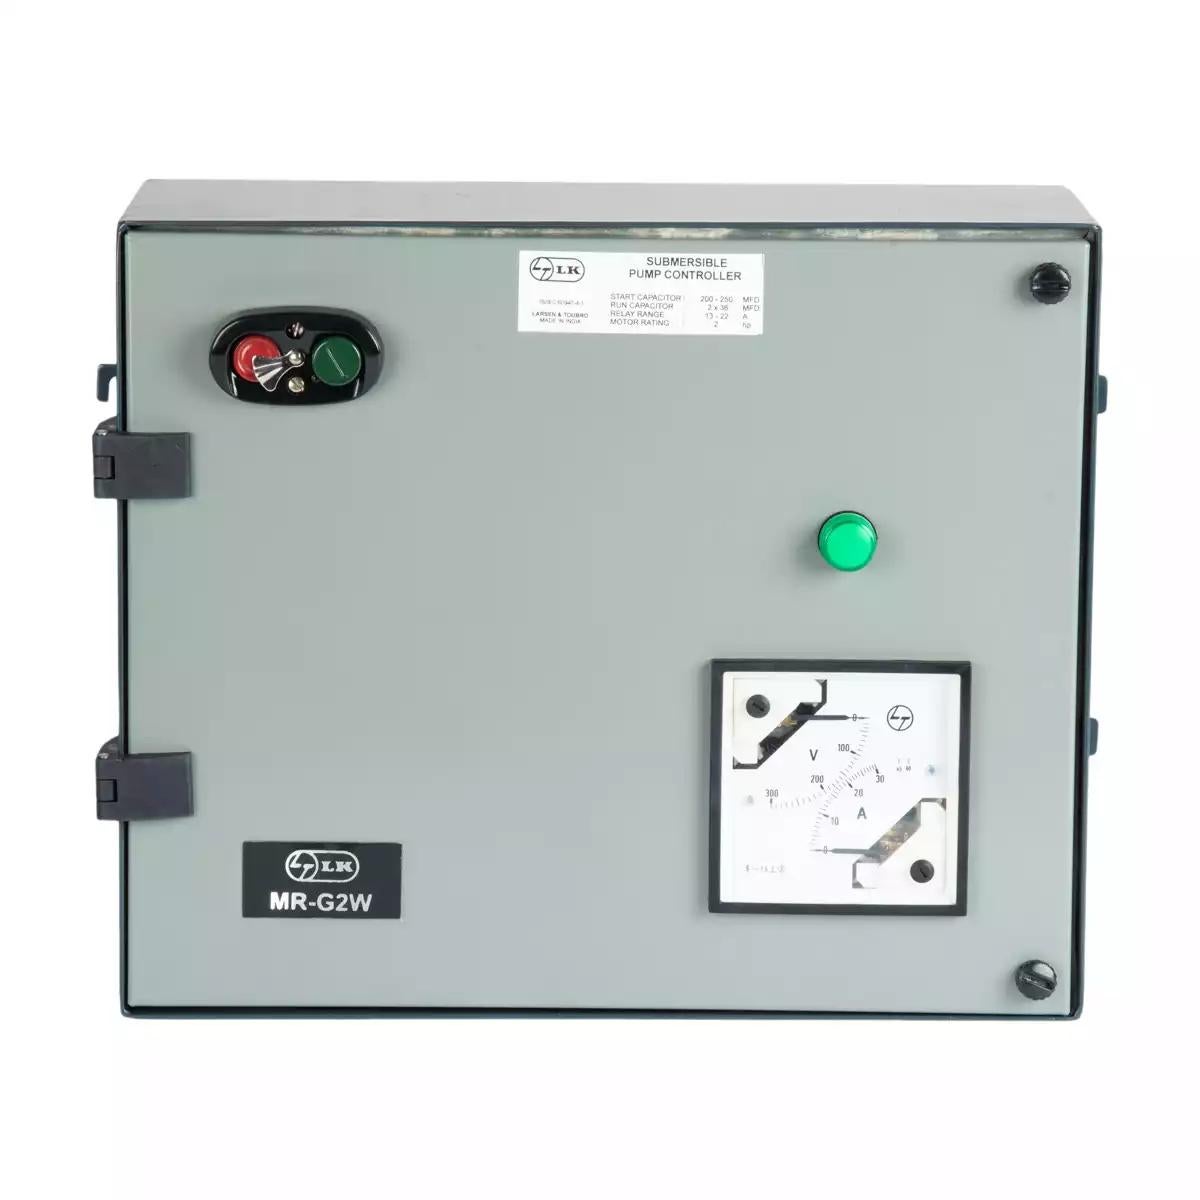 Single Phase Controller with WLC for Submersible Pump Application,MR-G2W,0.5HP,80 / 100mfd,1 x 25mfd